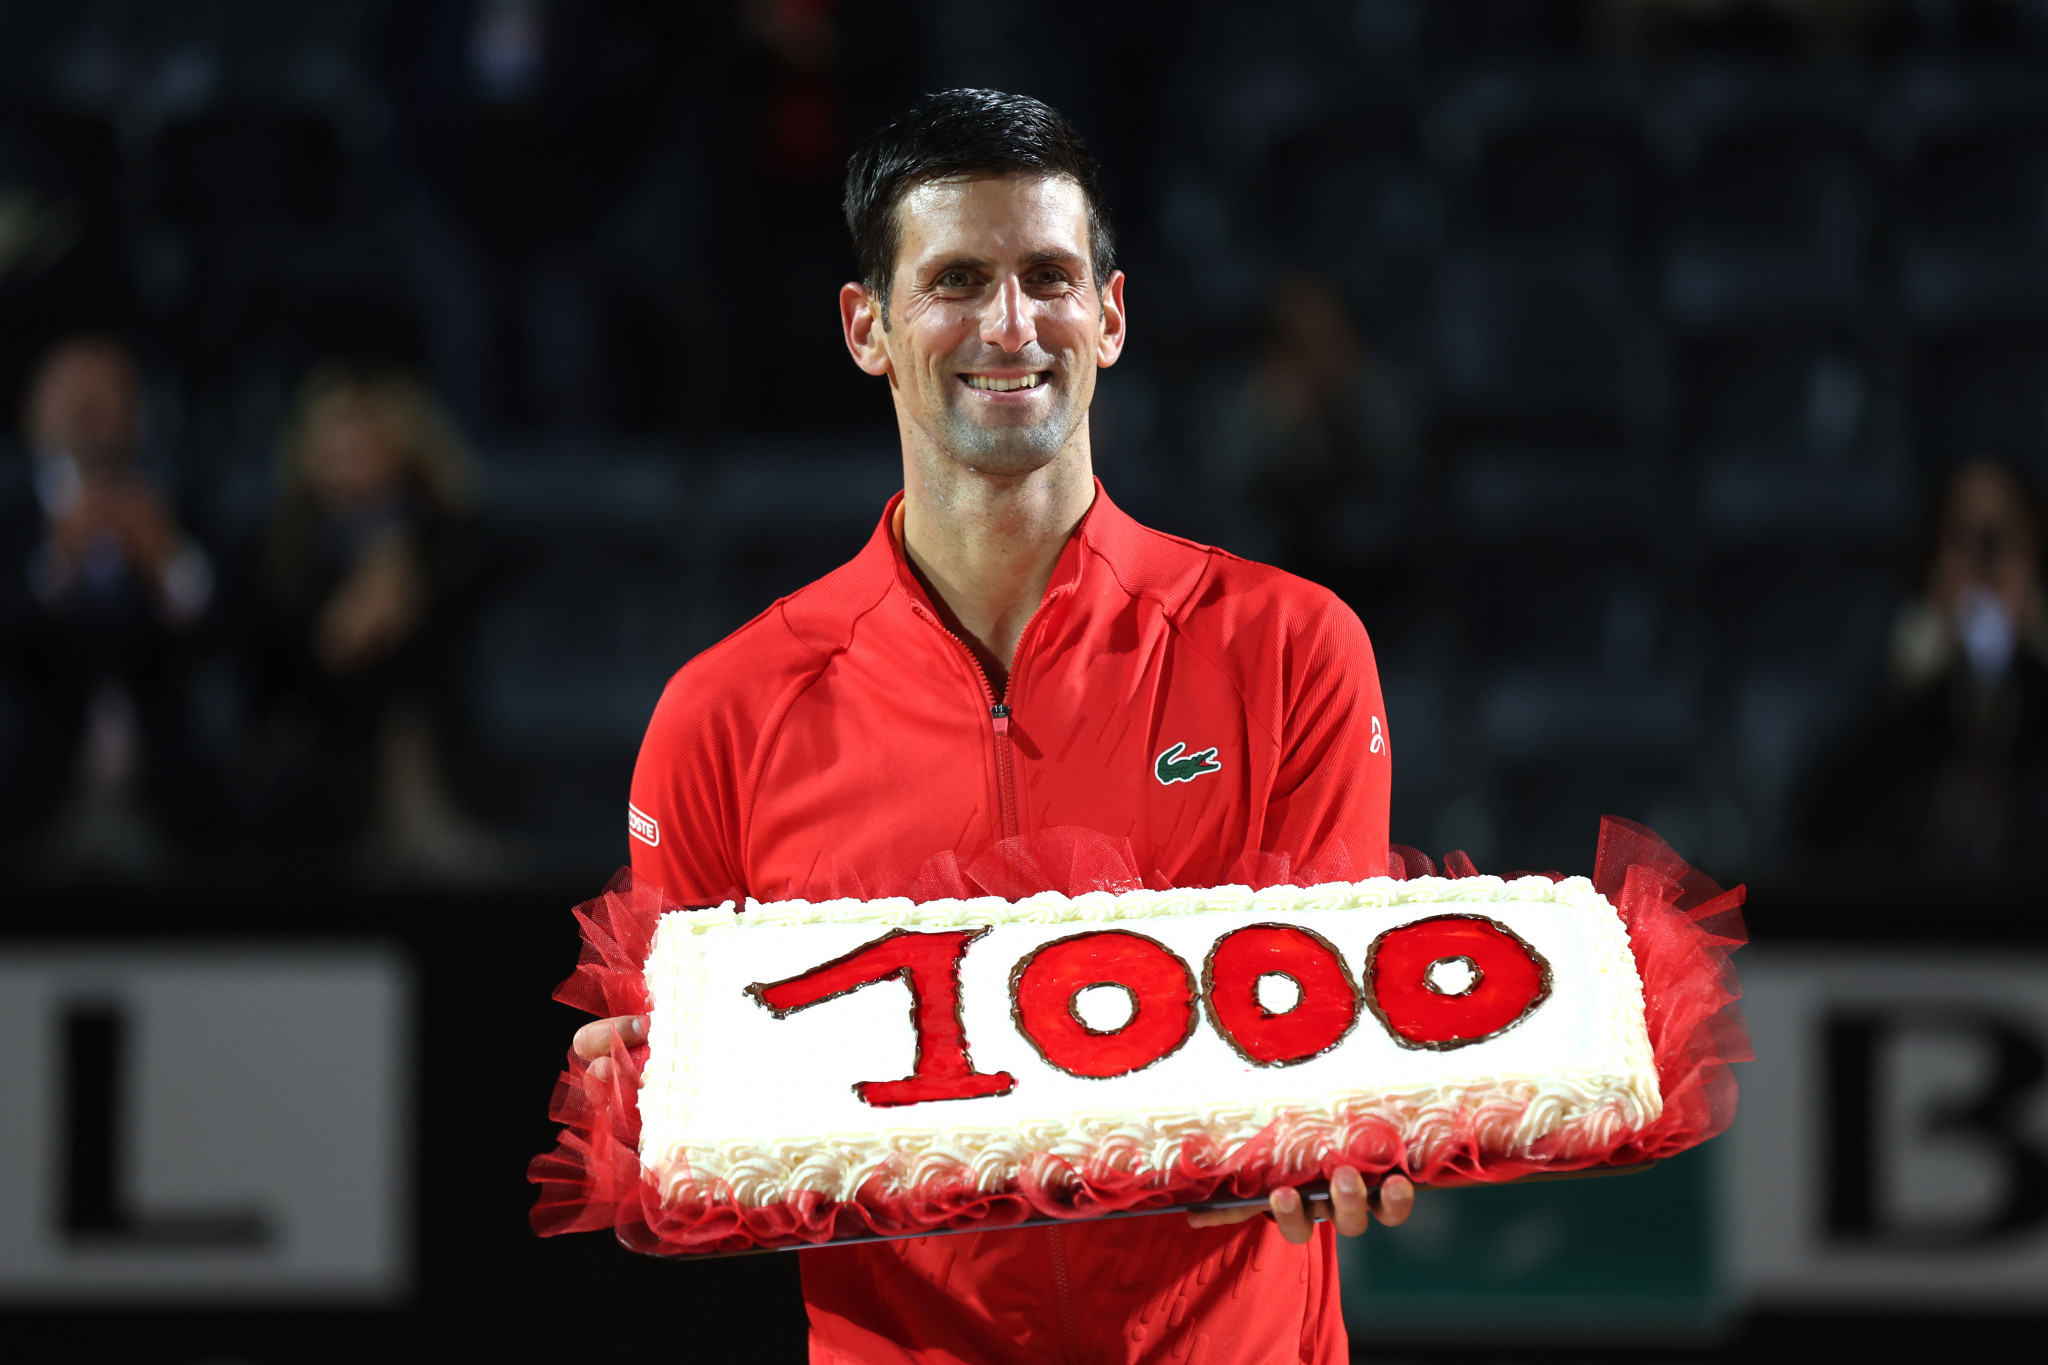 Djokovic becomes fifth player to reach 1,000 match wins with victory in Italian Open semi-final